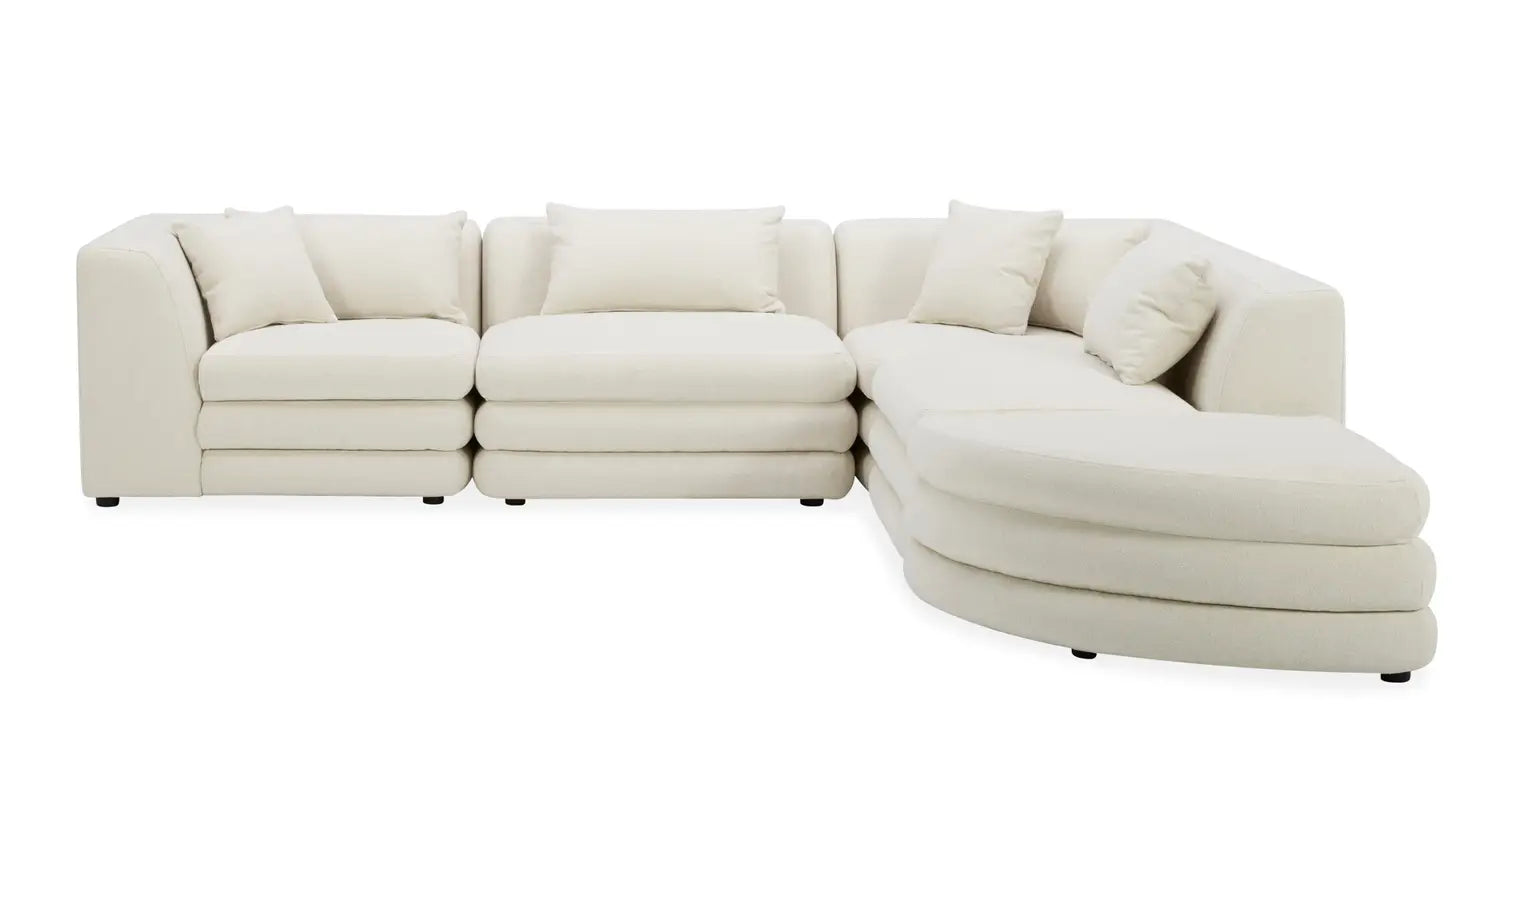 Lowtide Alcove Modular Sectional White Comfy & Modern-Stationary Sectionals-American Furniture Outlet